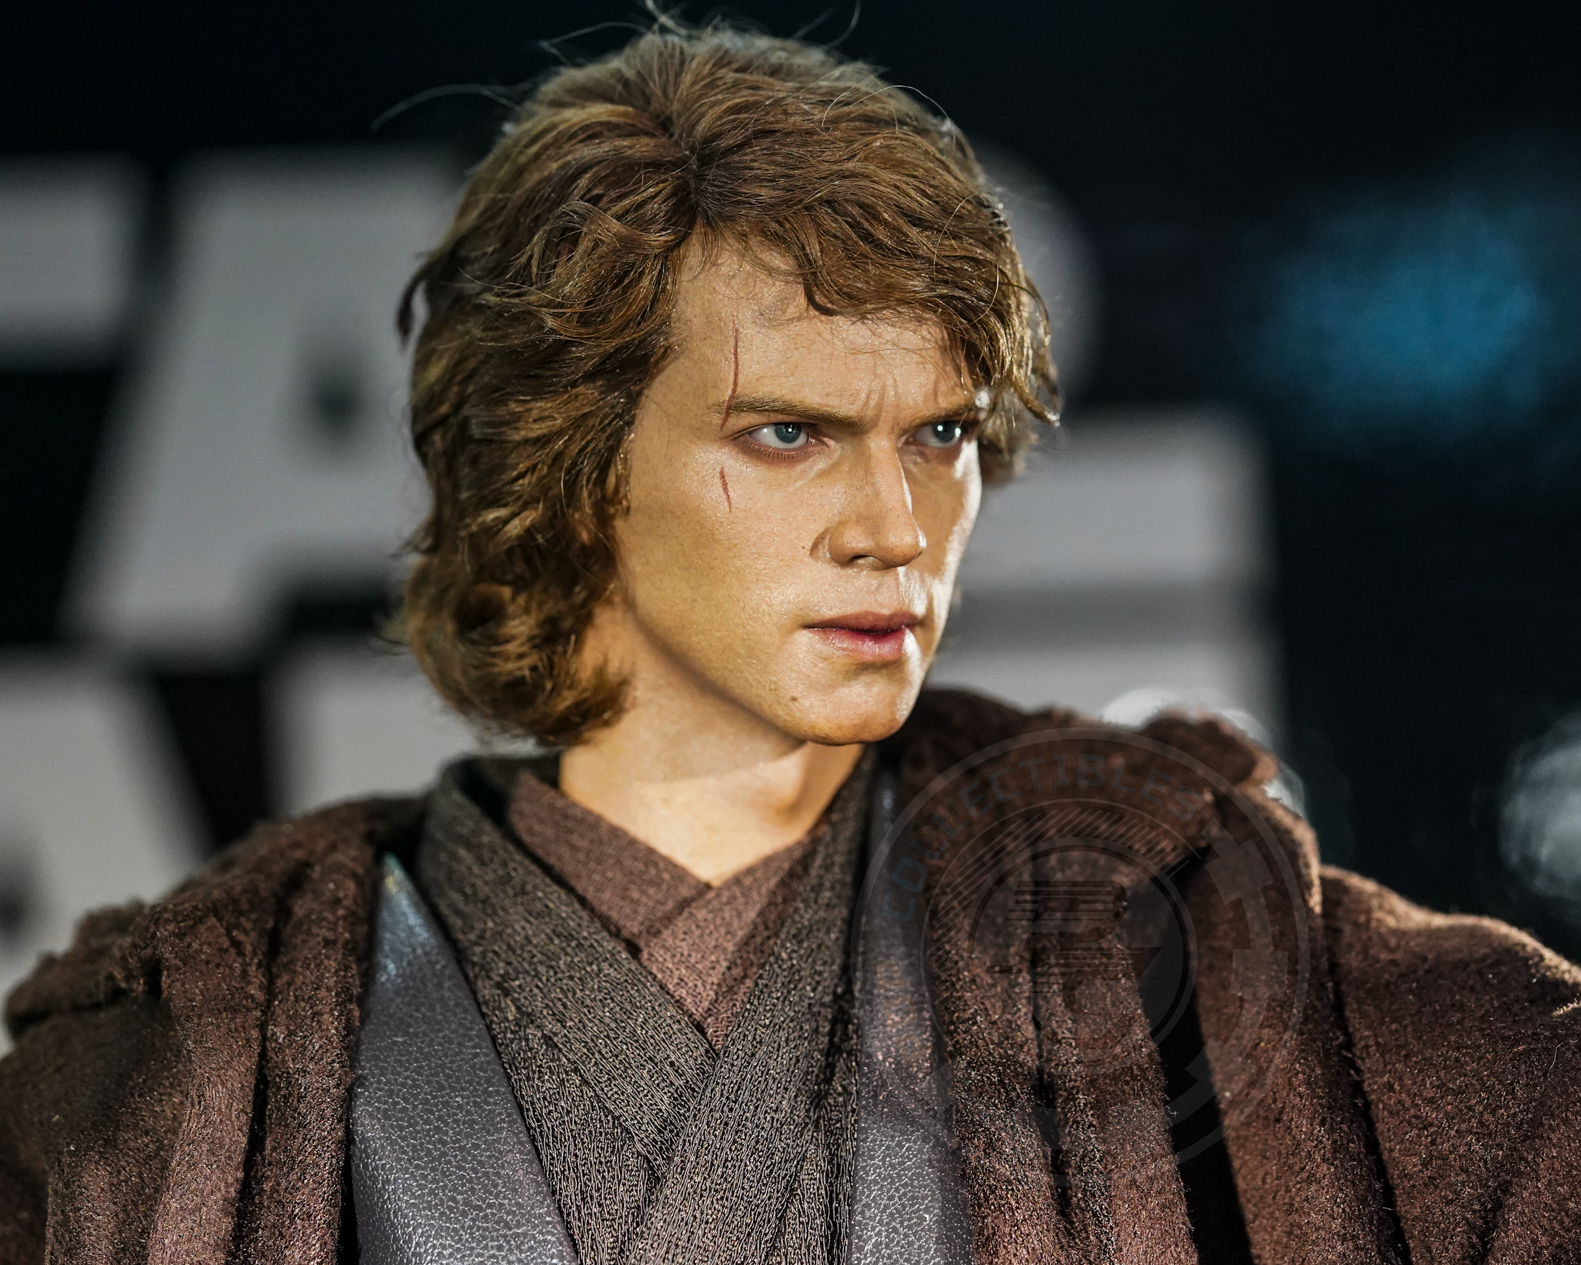 Sci-Fi - NEW PRODUCT: HOT TOYS: STAR WARS EPISODE III: REVENGE OF THE SITH™ ANAKIN SKYWALKER™ 1/6TH SCALE COLLECTIBLE FIGURE - Page 7 DSC03930-2_1024x1024@2x